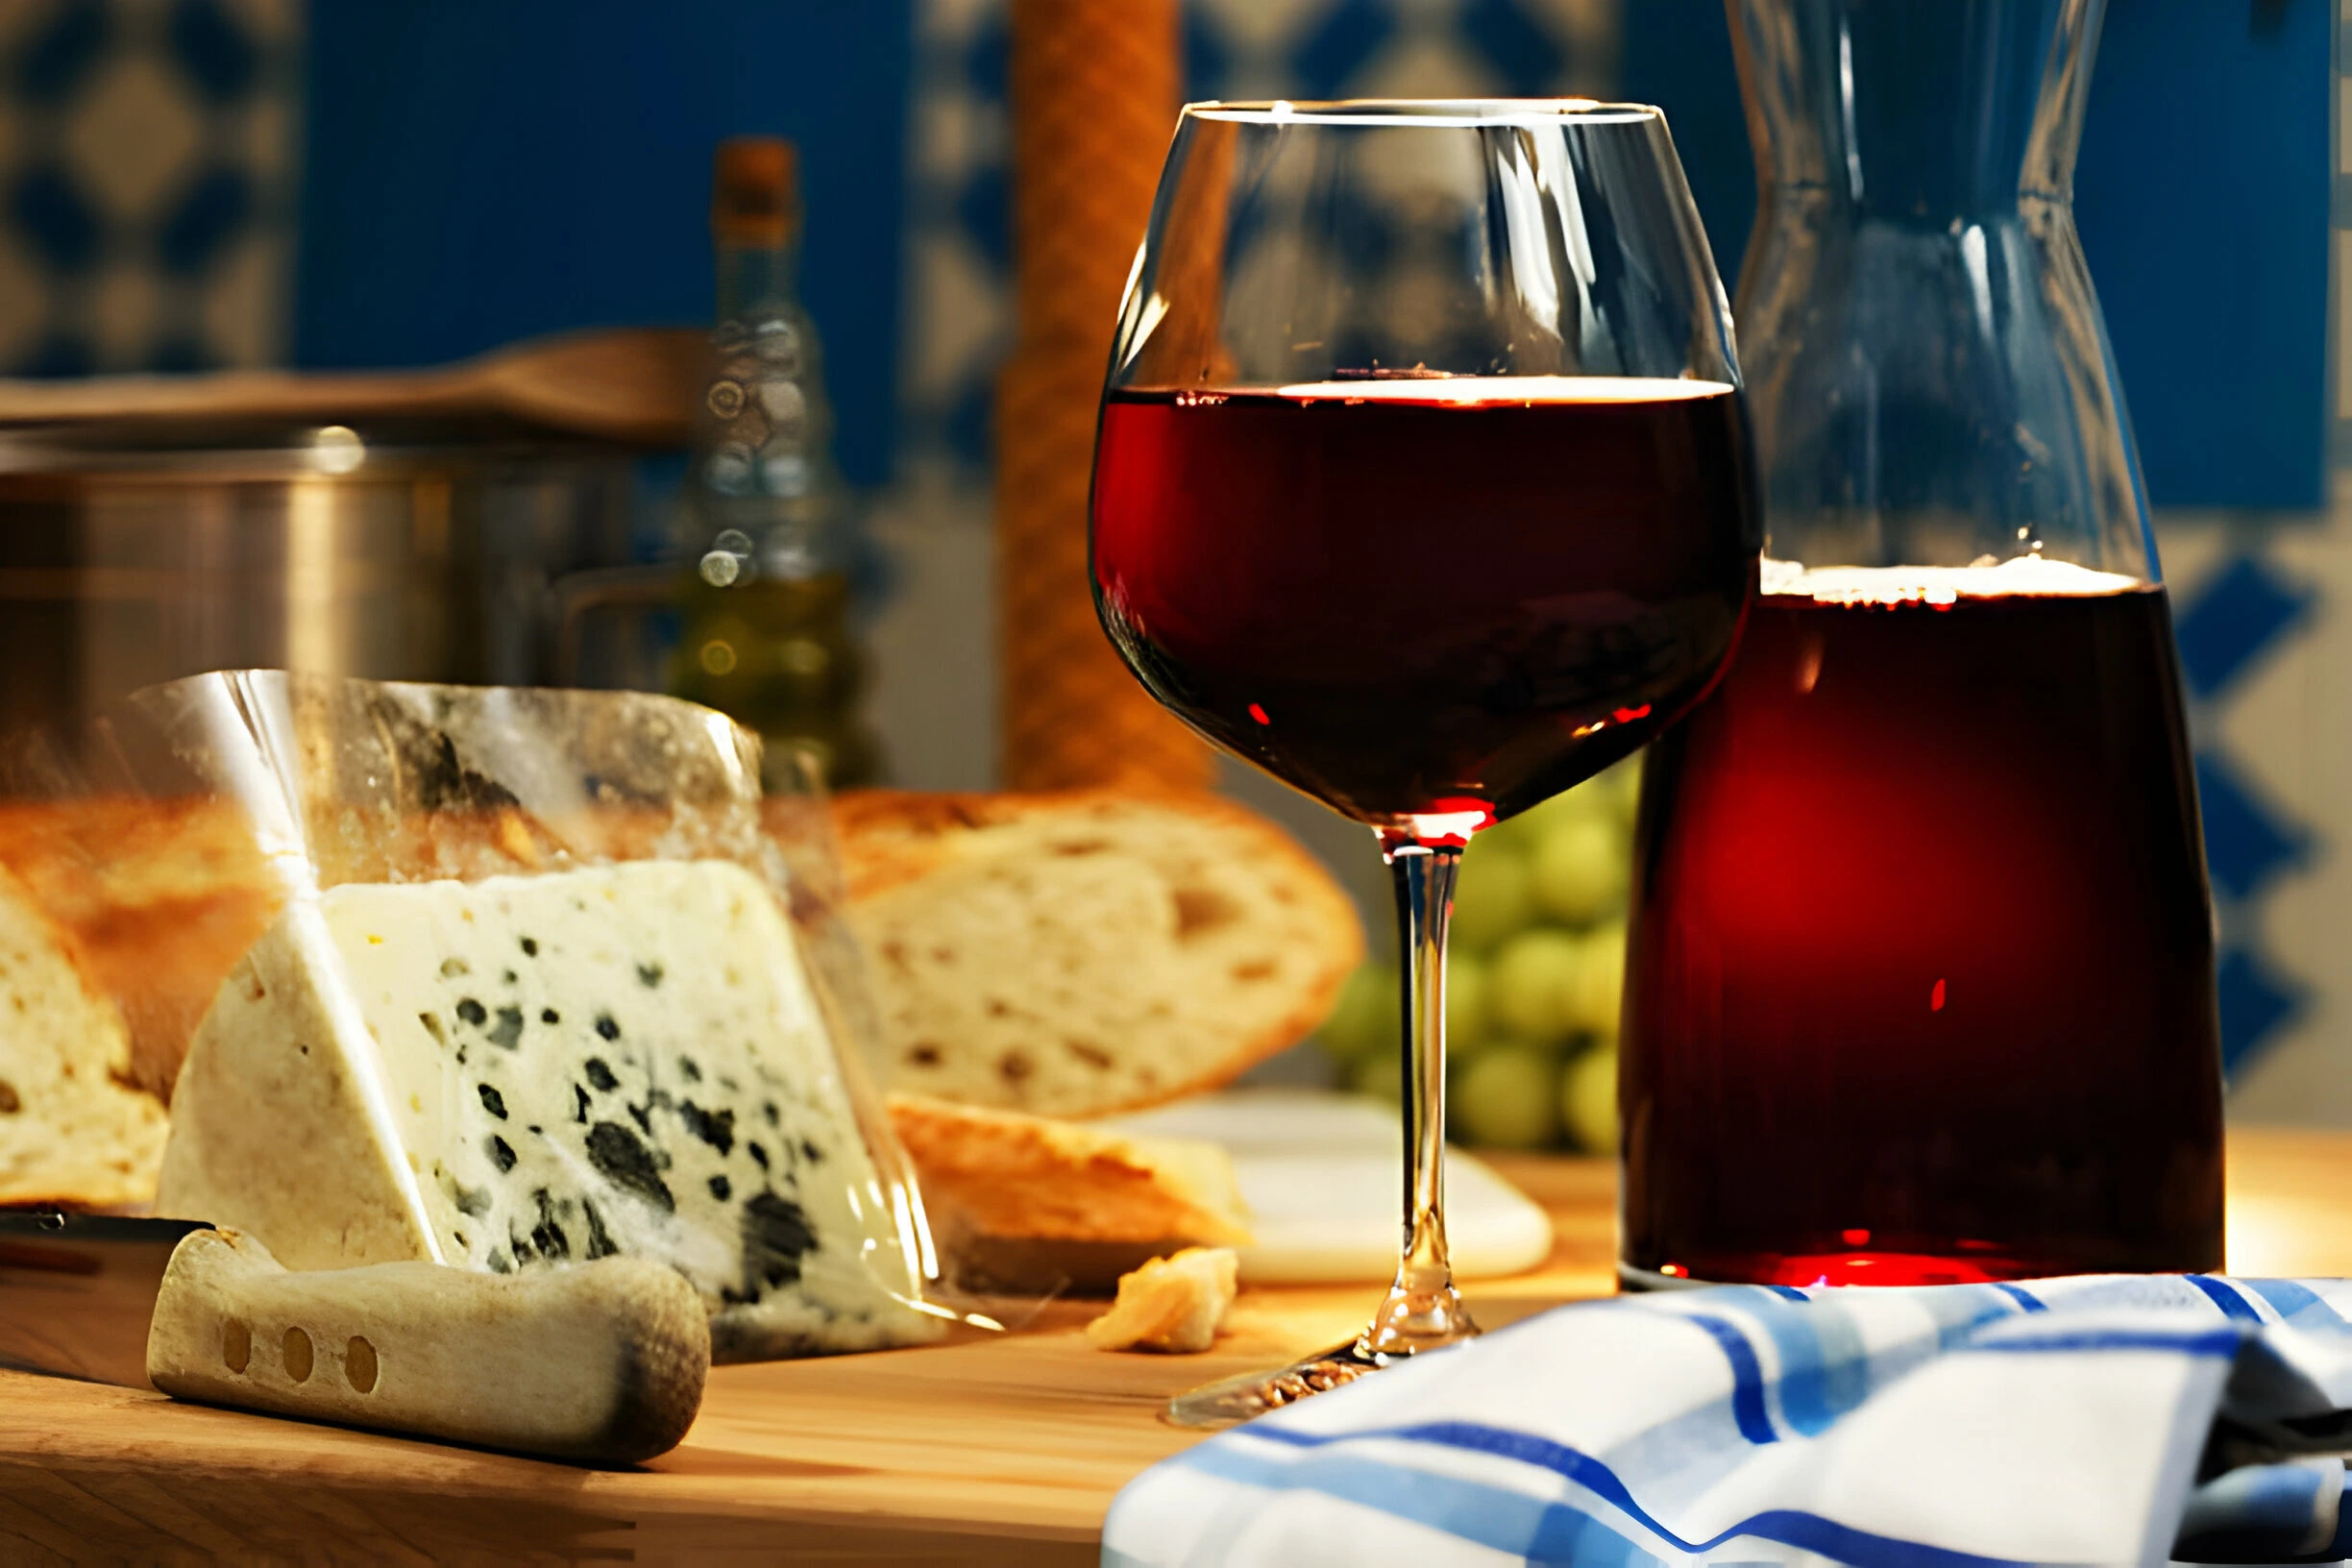 What Cheese Goes With Cabernet Sauvignon?